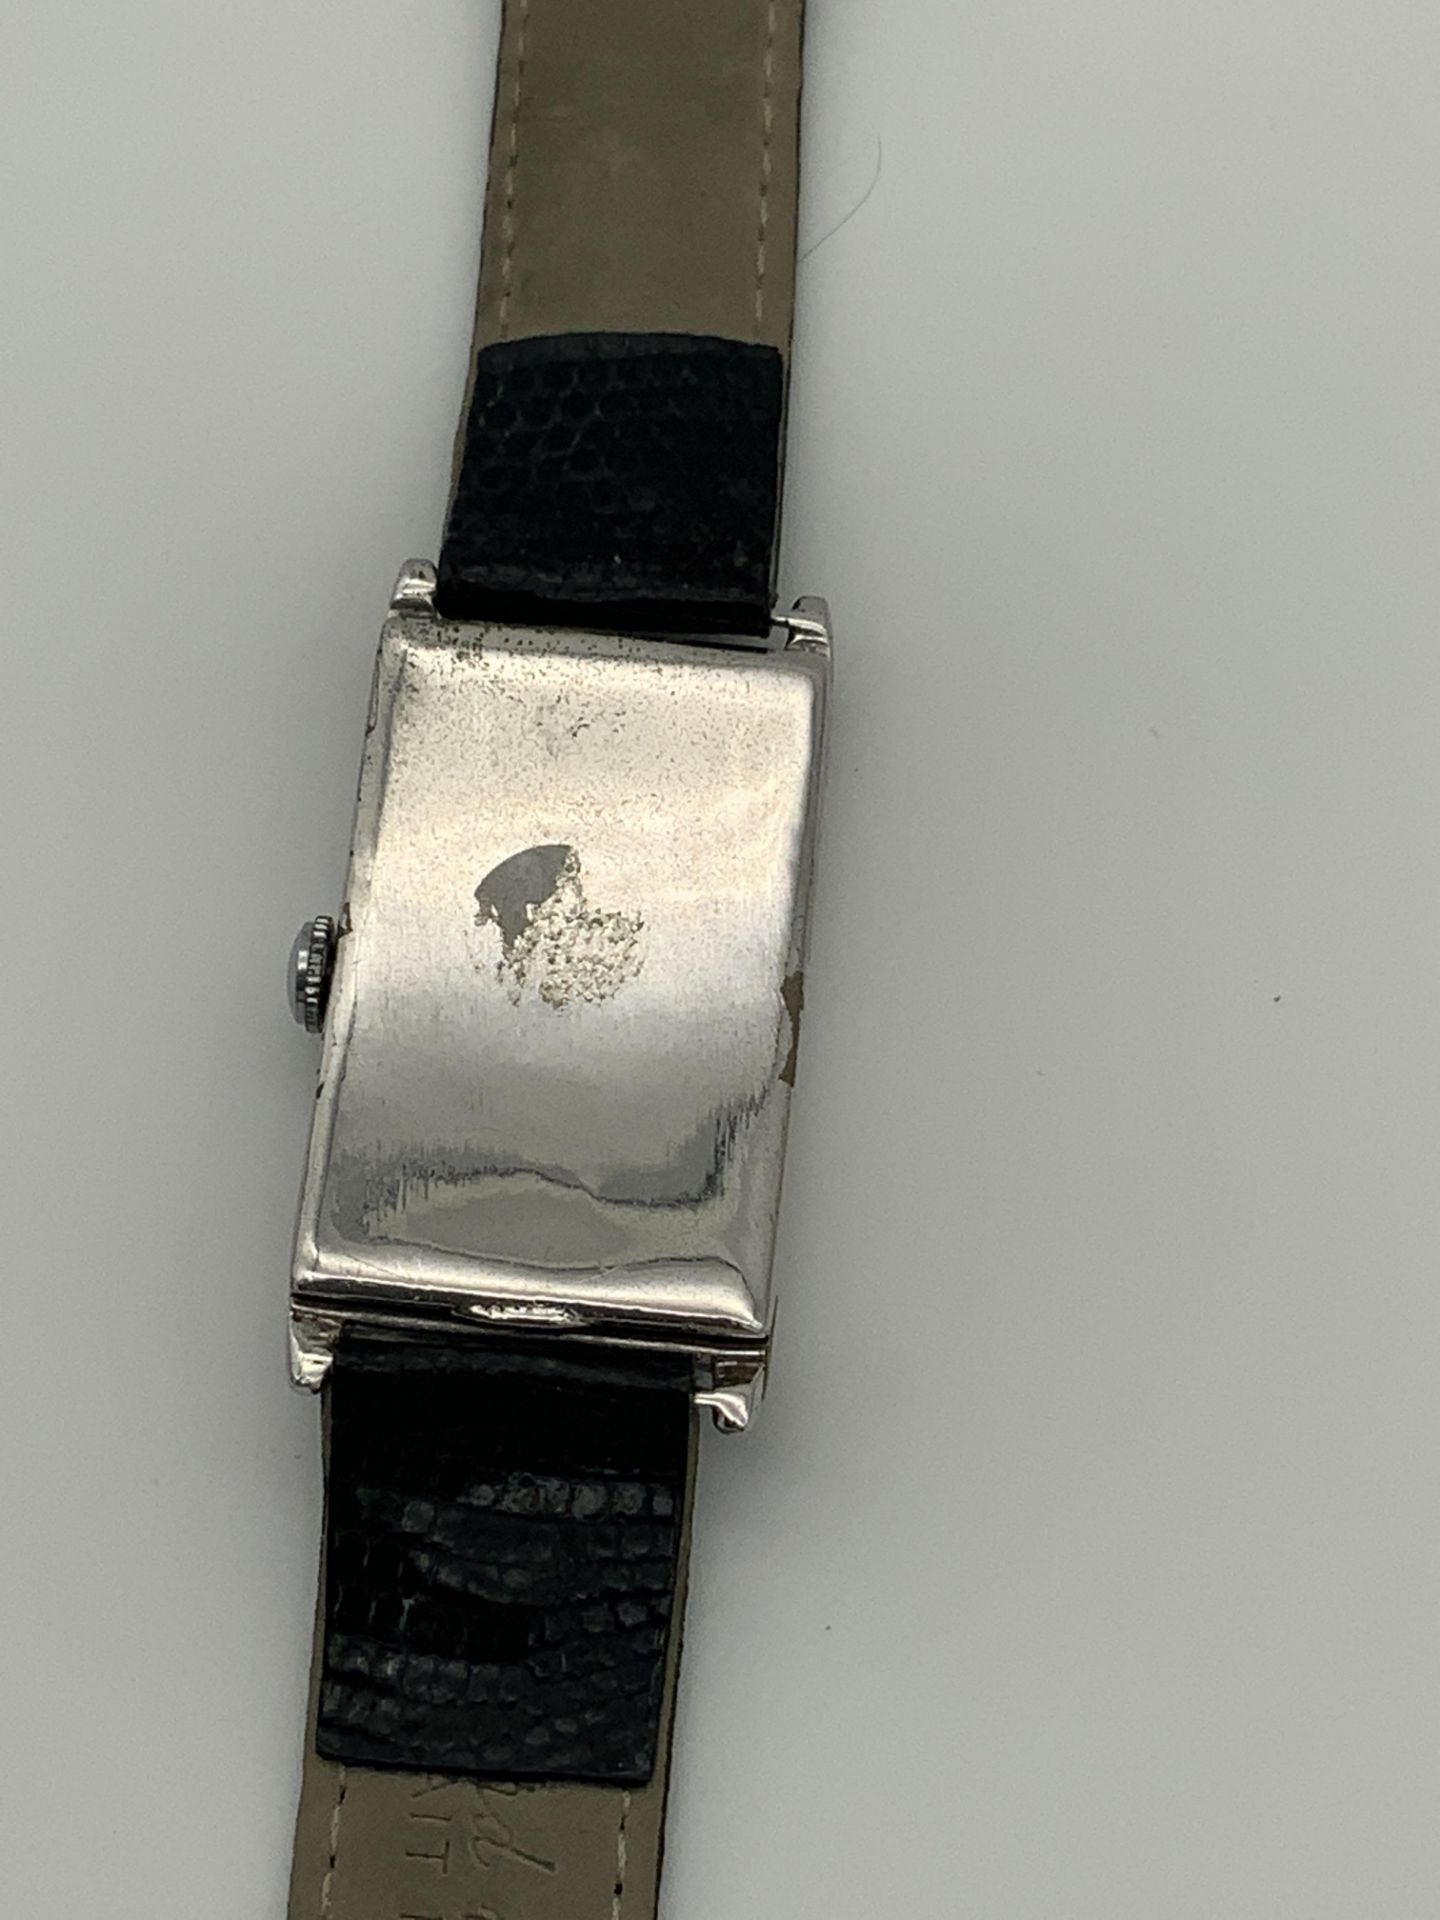 STAINLESS STEEL LIP WATCH - Image 2 of 7